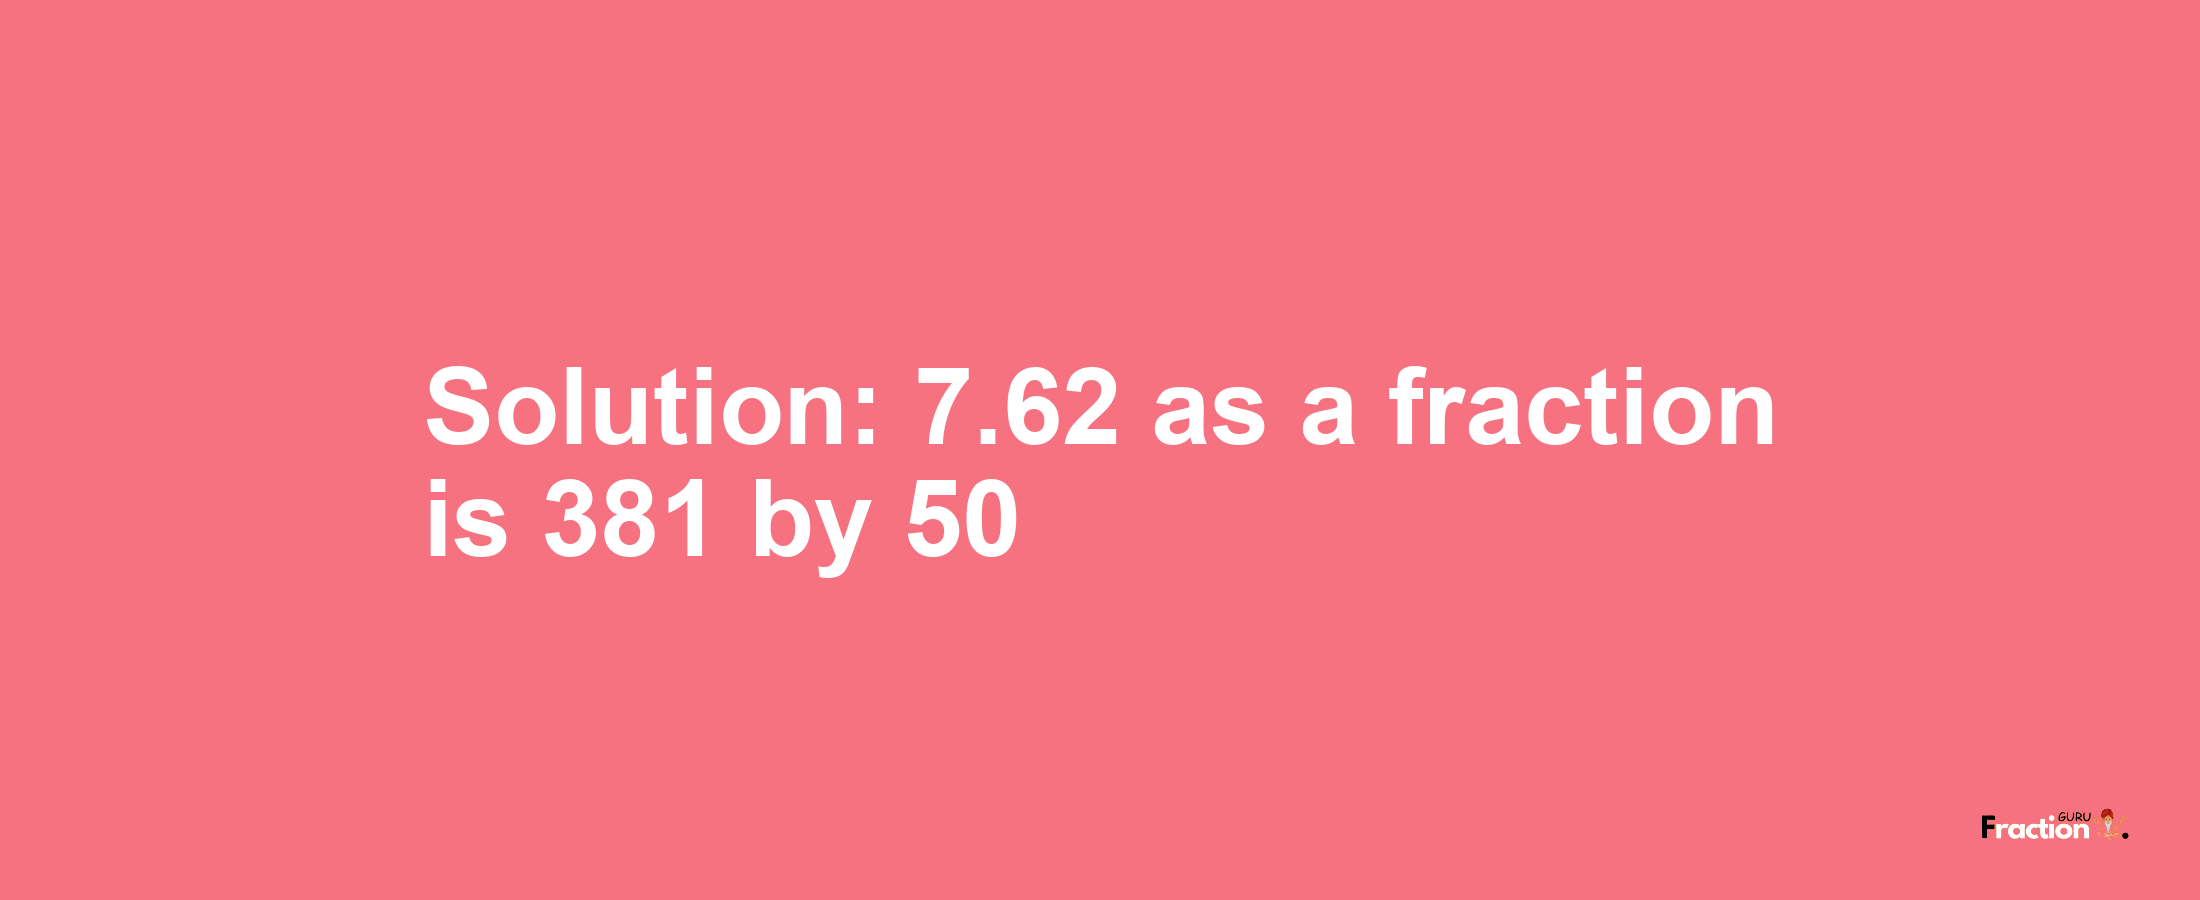 Solution:7.62 as a fraction is 381/50